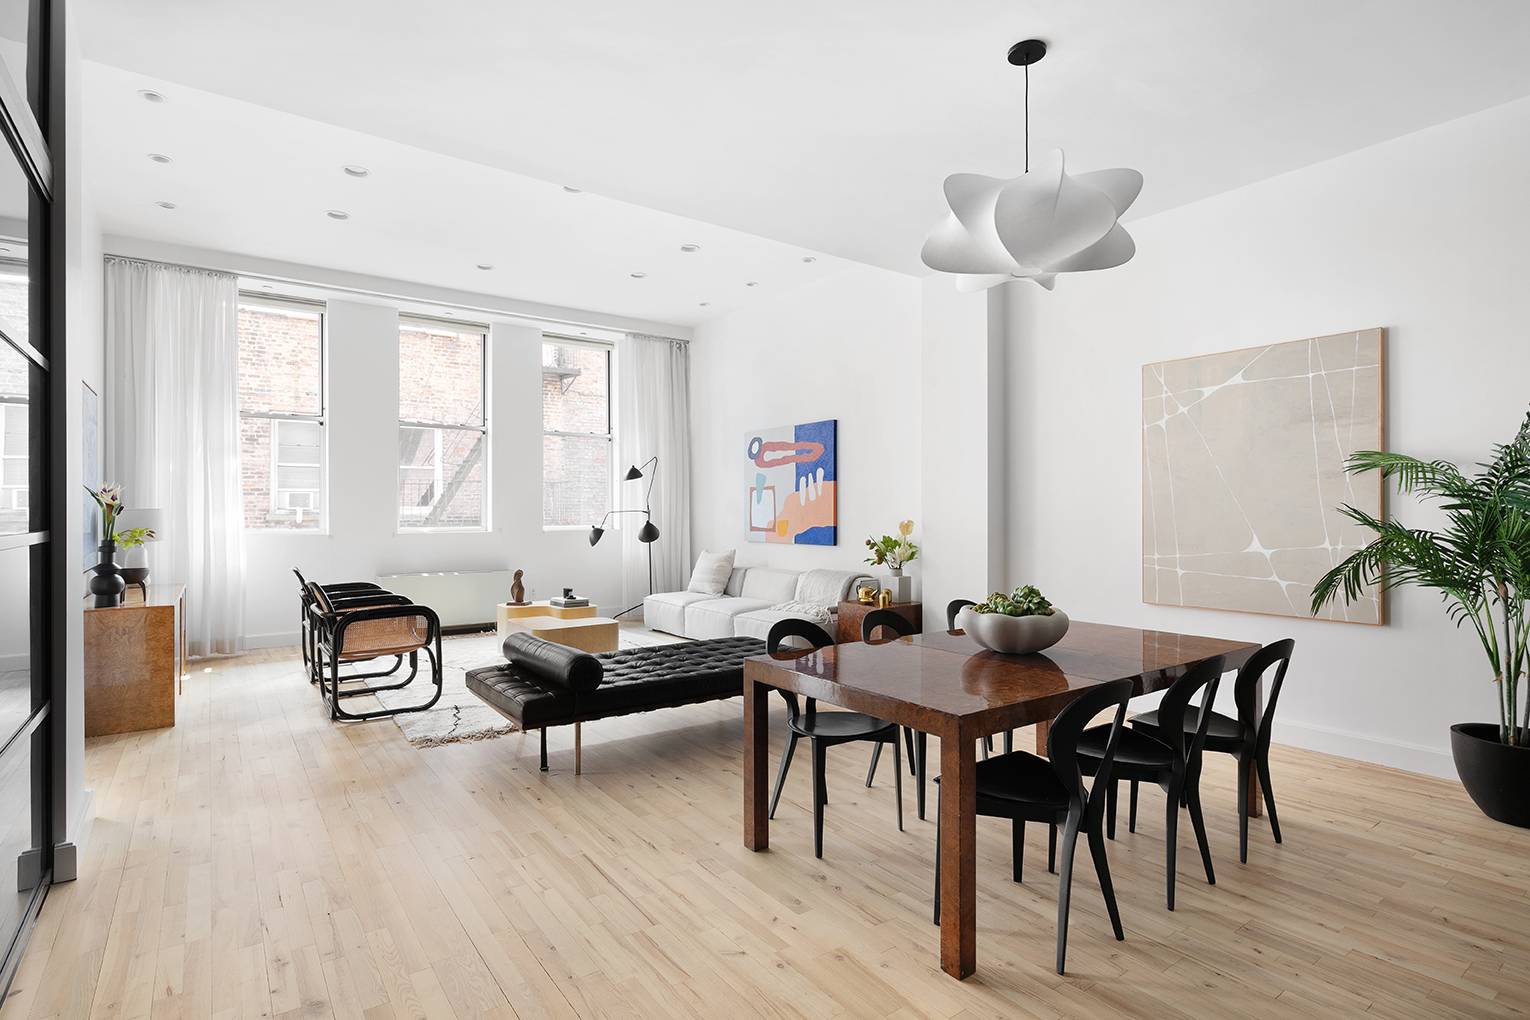 Upon entering this stunning loft located in the West Chelsea's gallery district, you'll be instantly impressed with its 12' ceilings, over sized windows, and expansive layout.